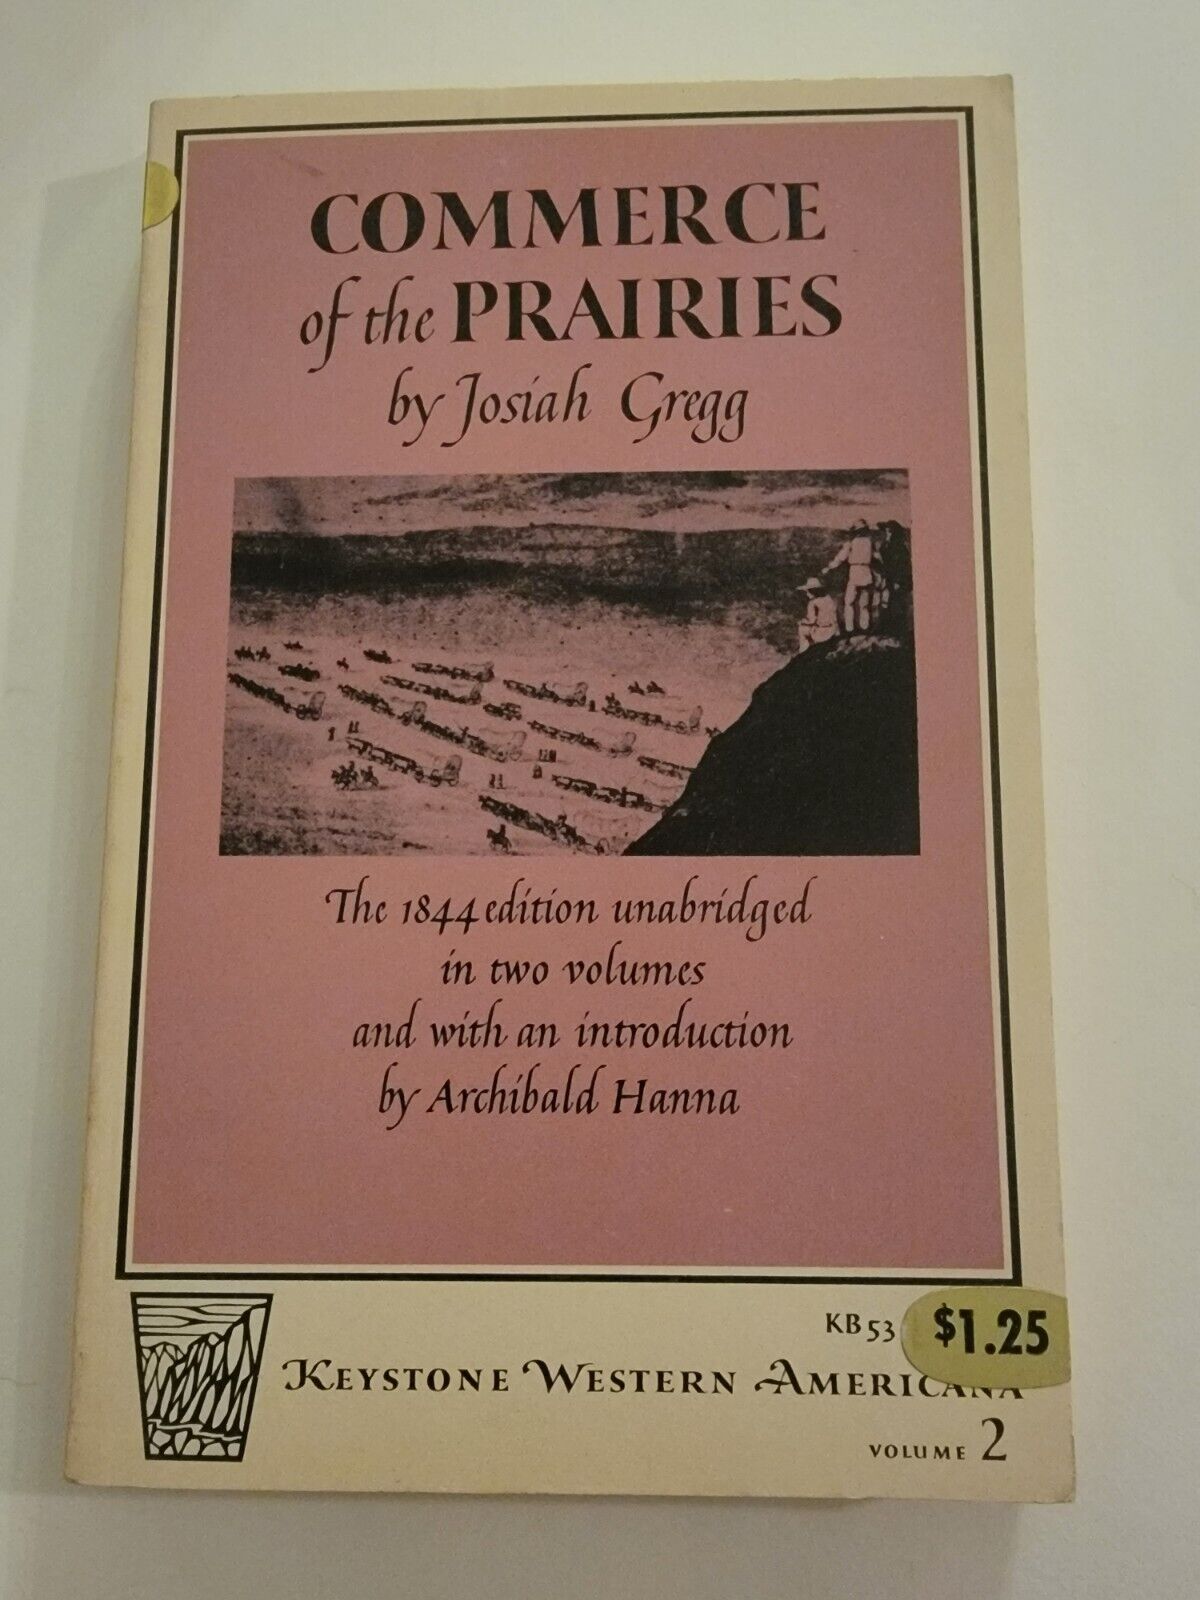 Commerce Of The Prairies By Josiah Gregg Volumes 1 And 2